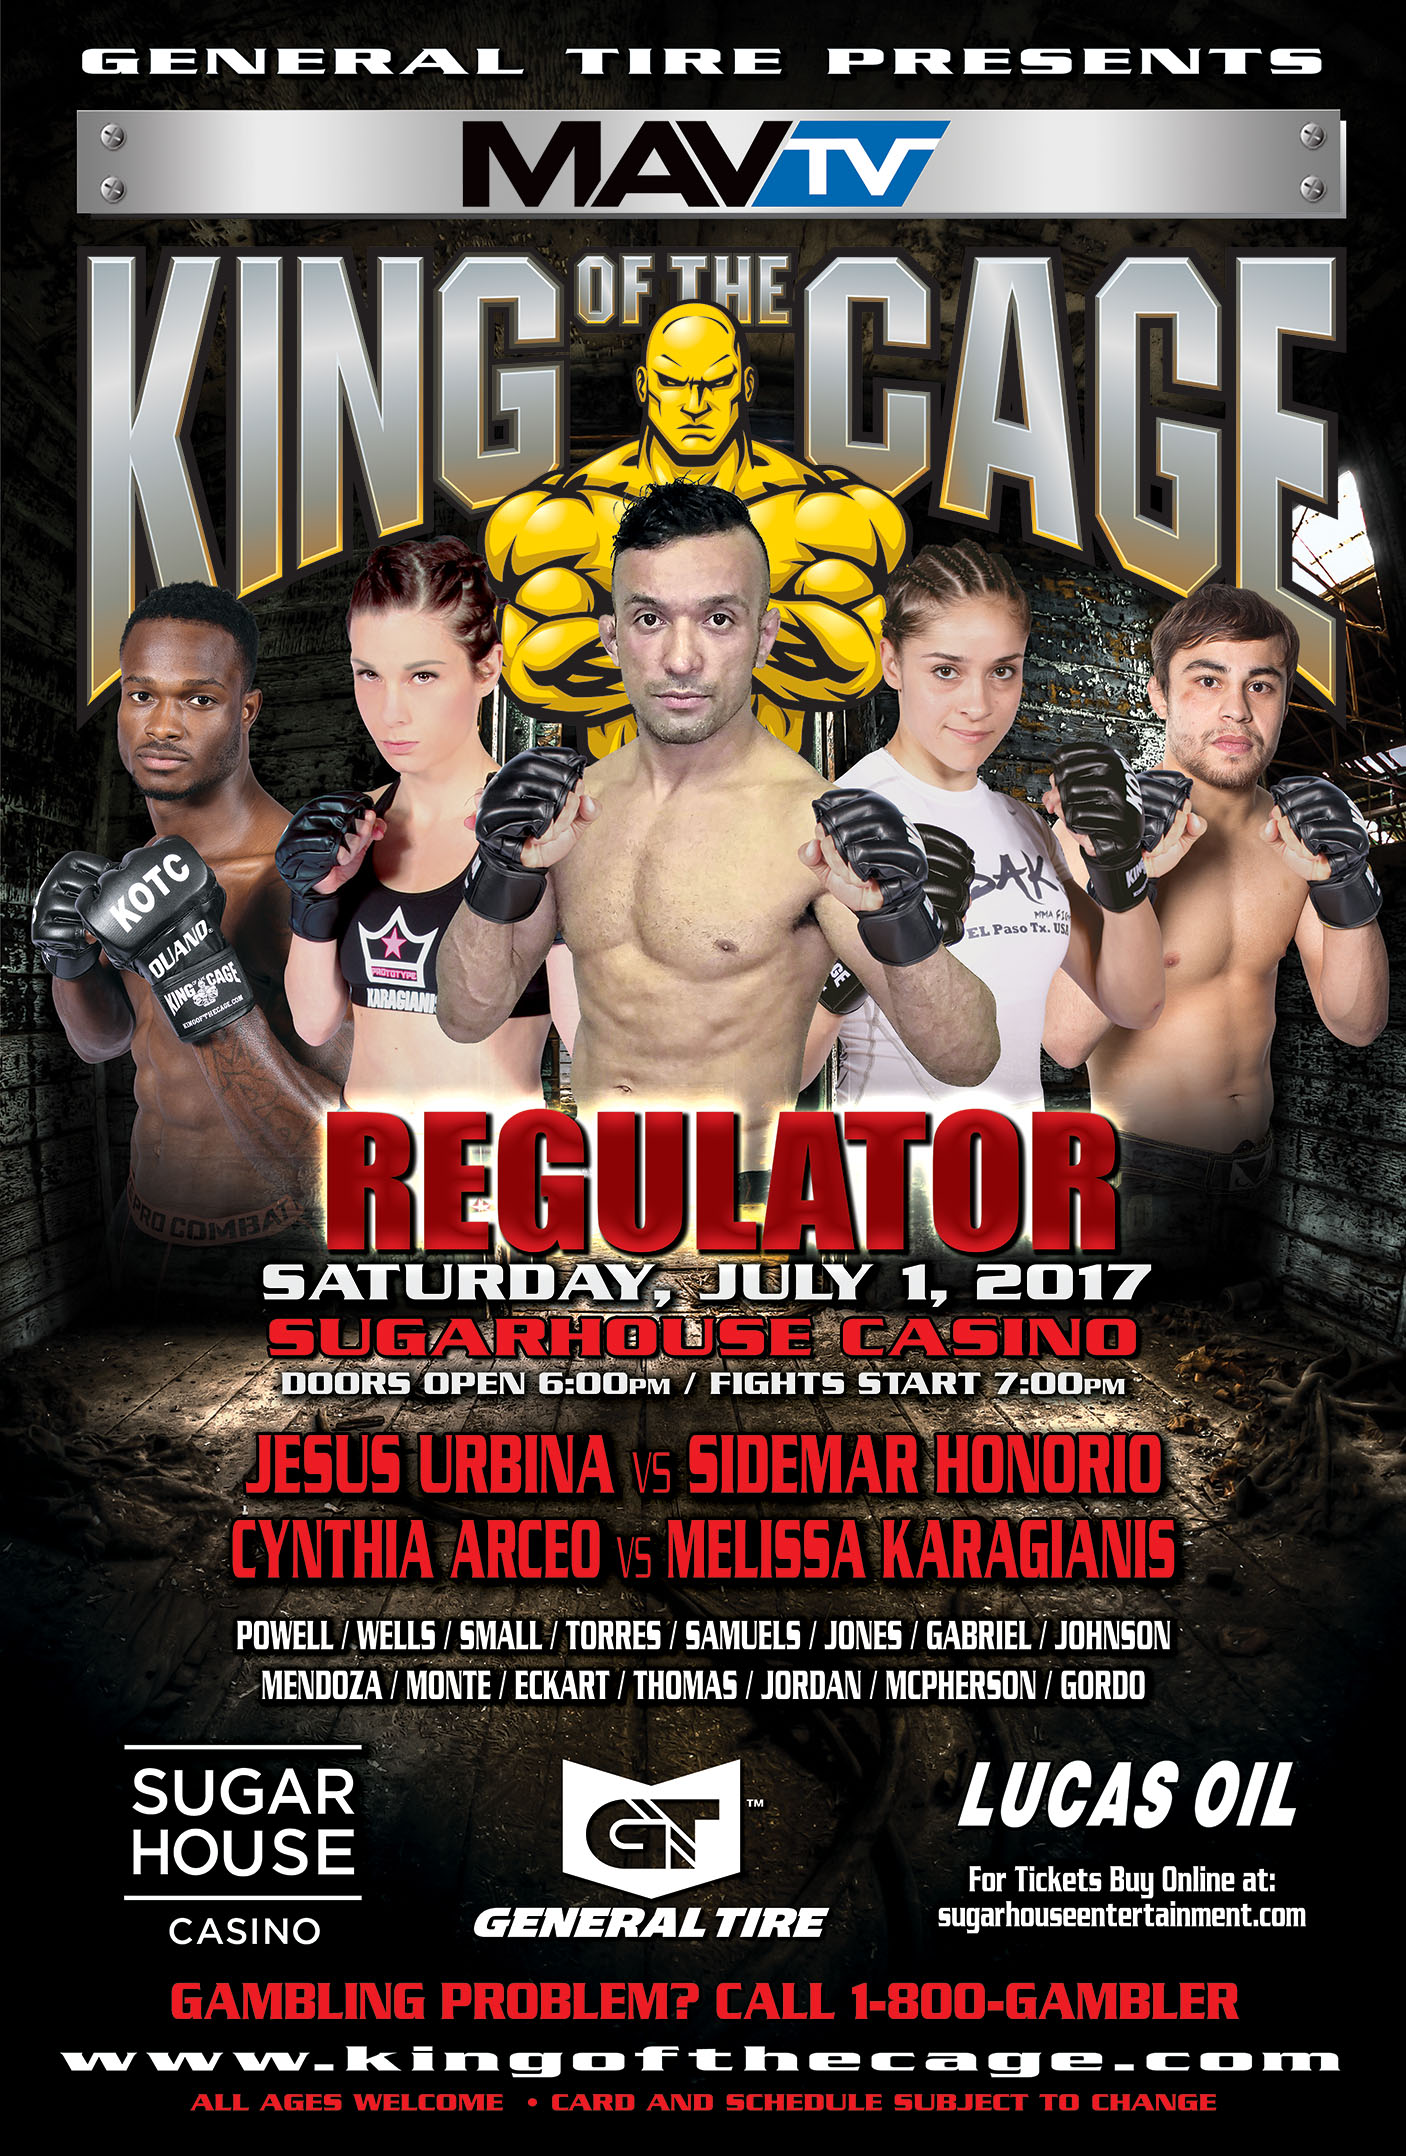 King of the Cage Debuts at SugarHouse Casino on July 1 for “REGULATOR”